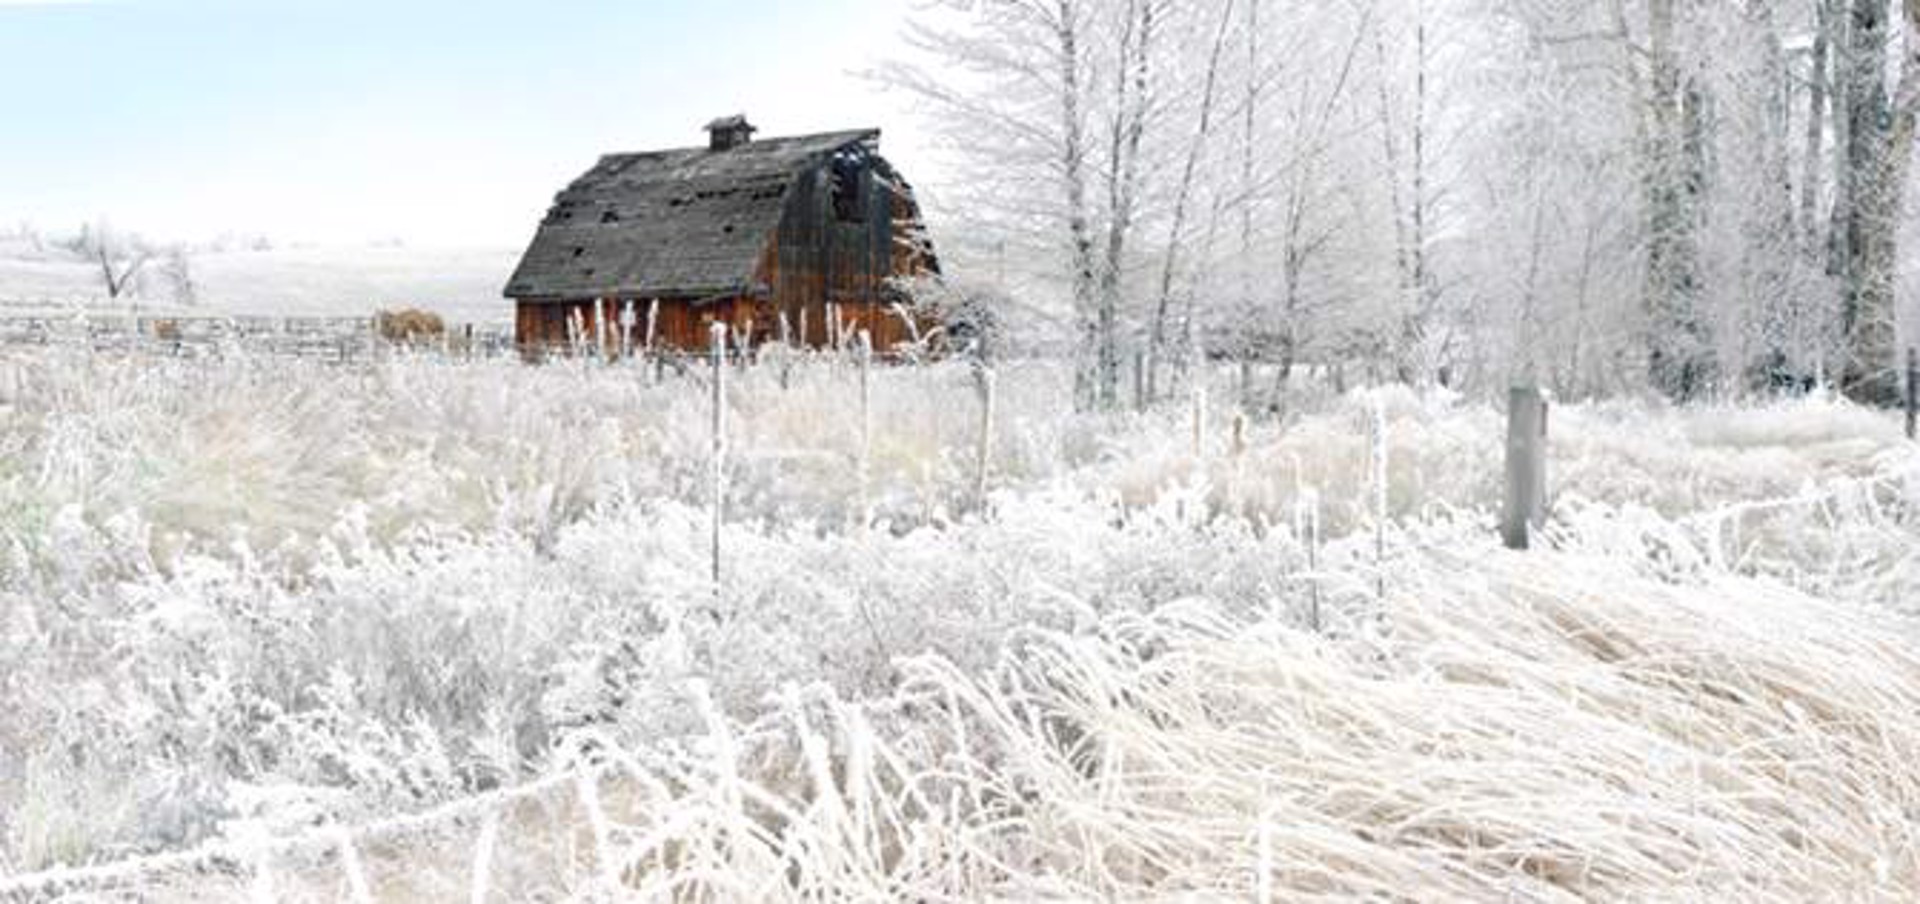 Barn and Hoar Frost by Pete Ramberg